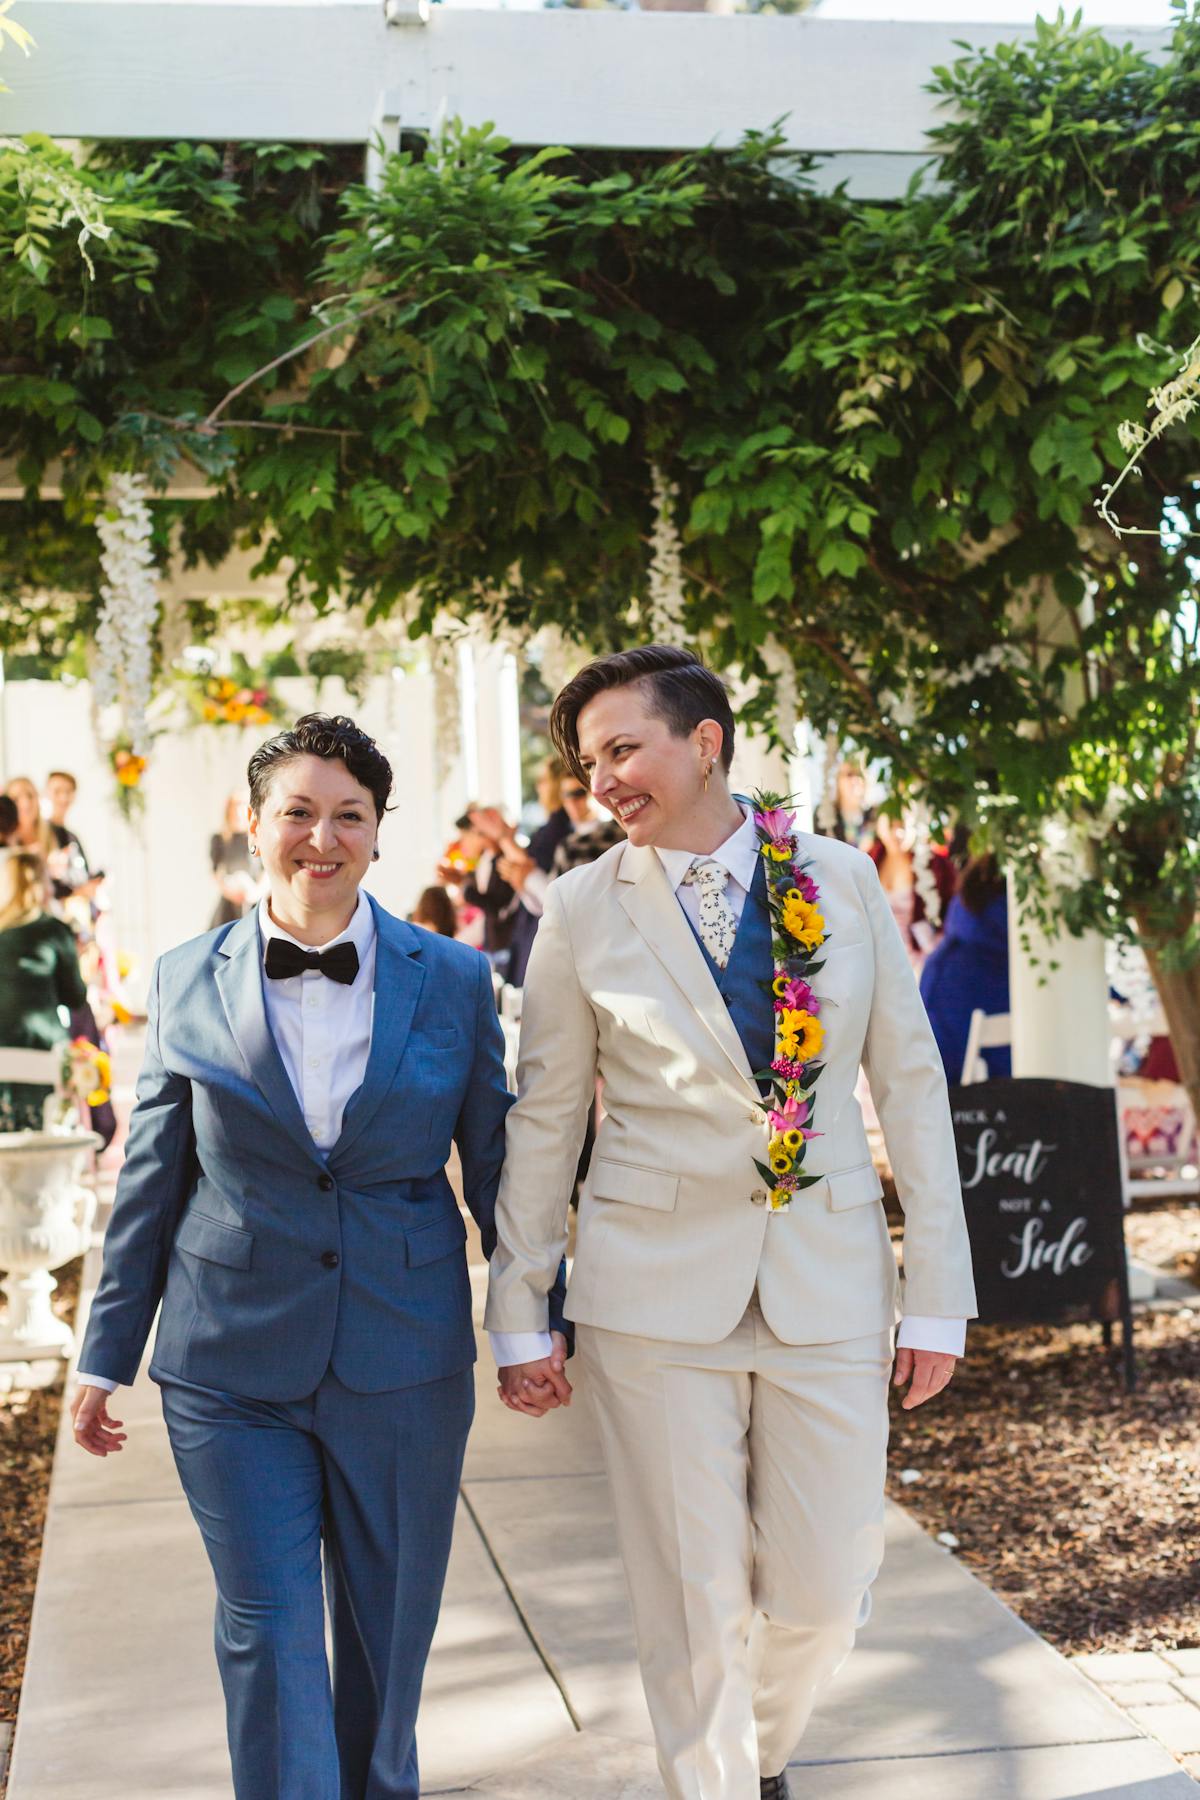 Newlywed brides in suits holding hands walking down the aisle wearing light blue and tan alternative bride outfits.